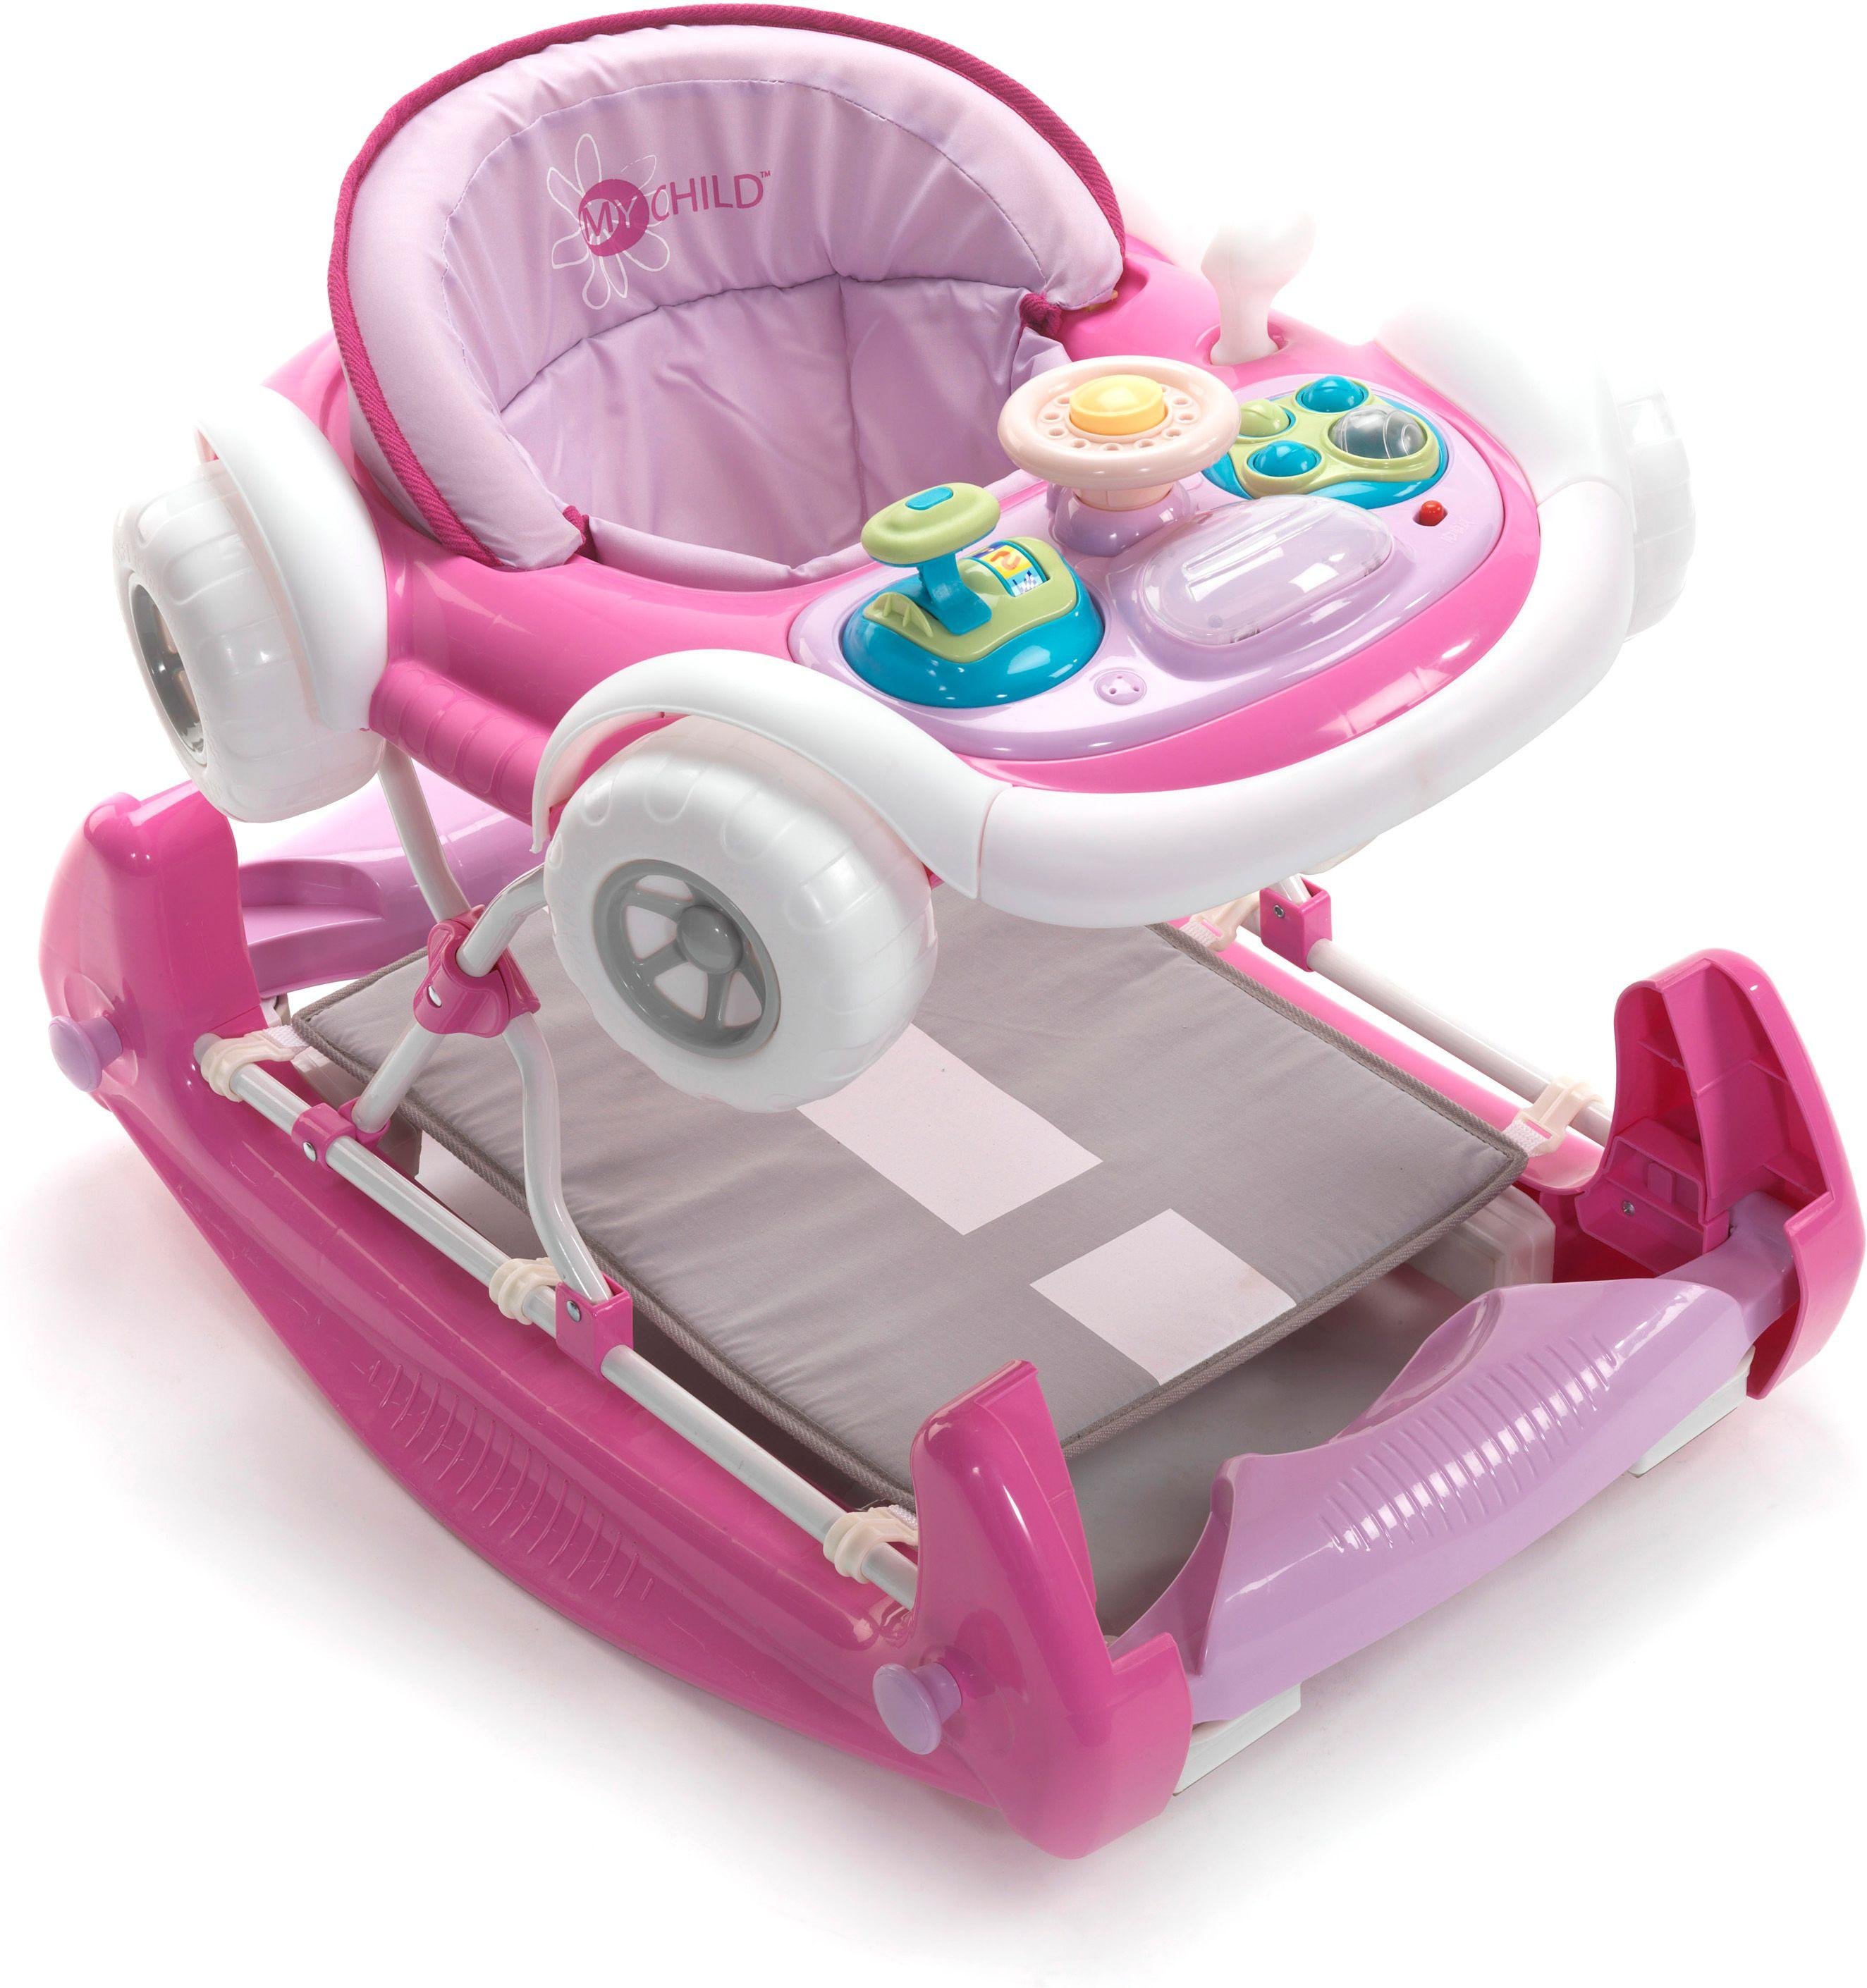 MyChild Coupe 2 In 1 Baby Walker - Pink